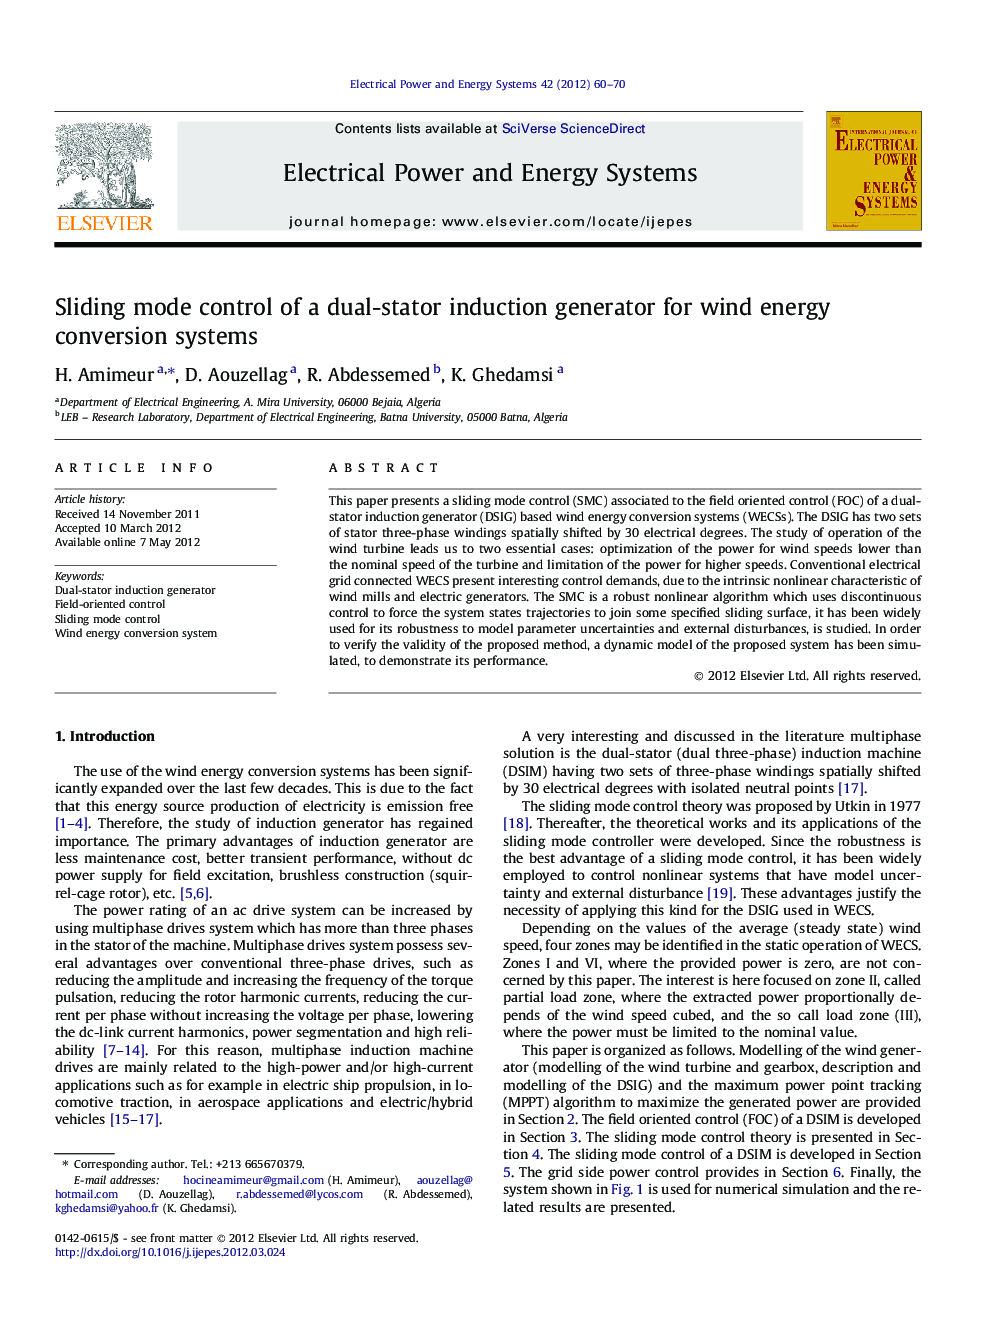 Sliding mode control of a dual-stator induction generator for wind energy conversion systems